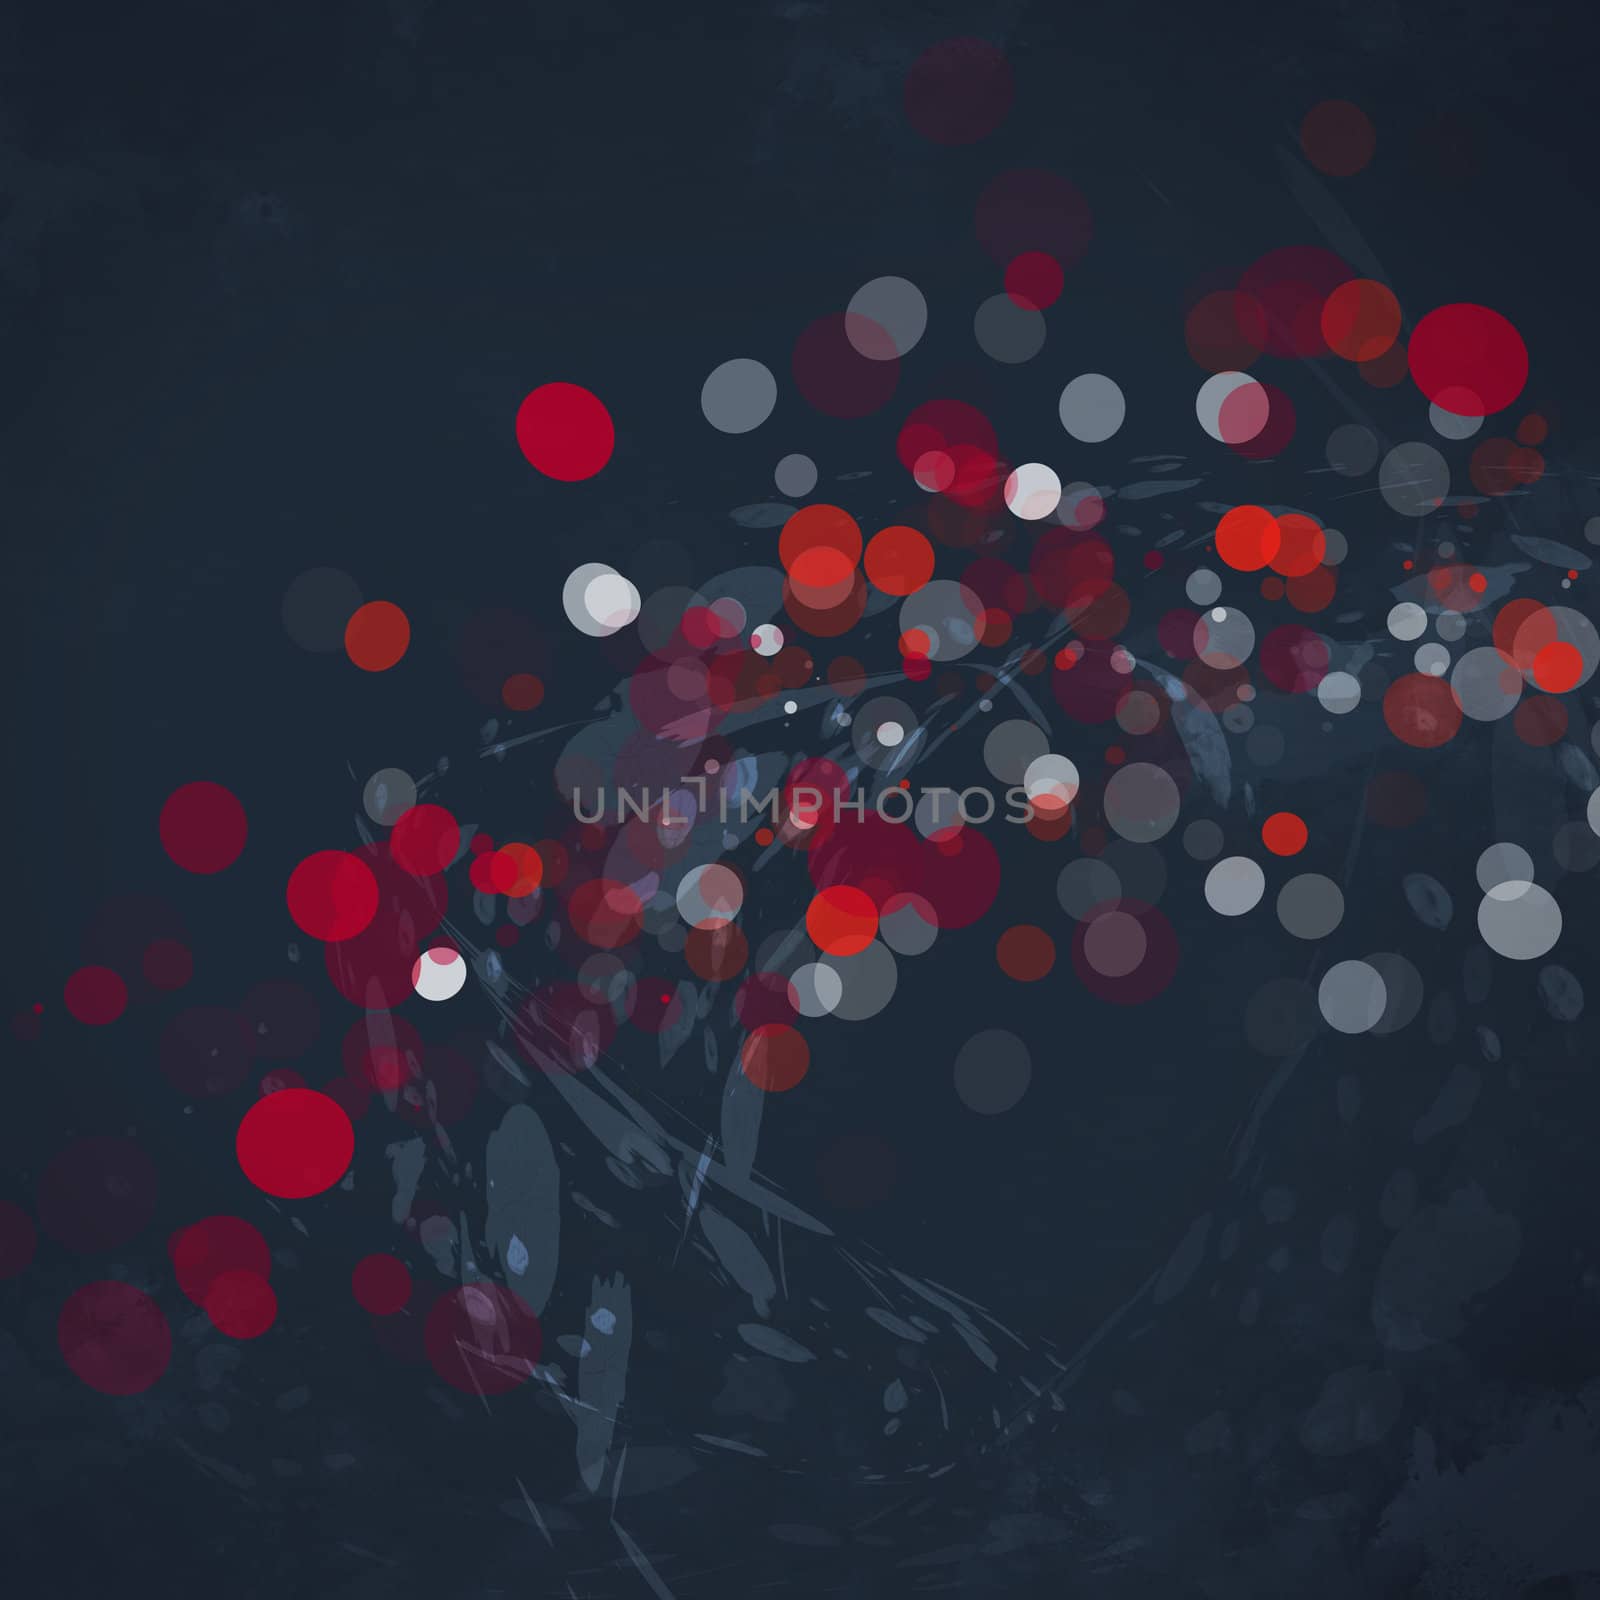 Grunge textured retro style abstract background with space for your text